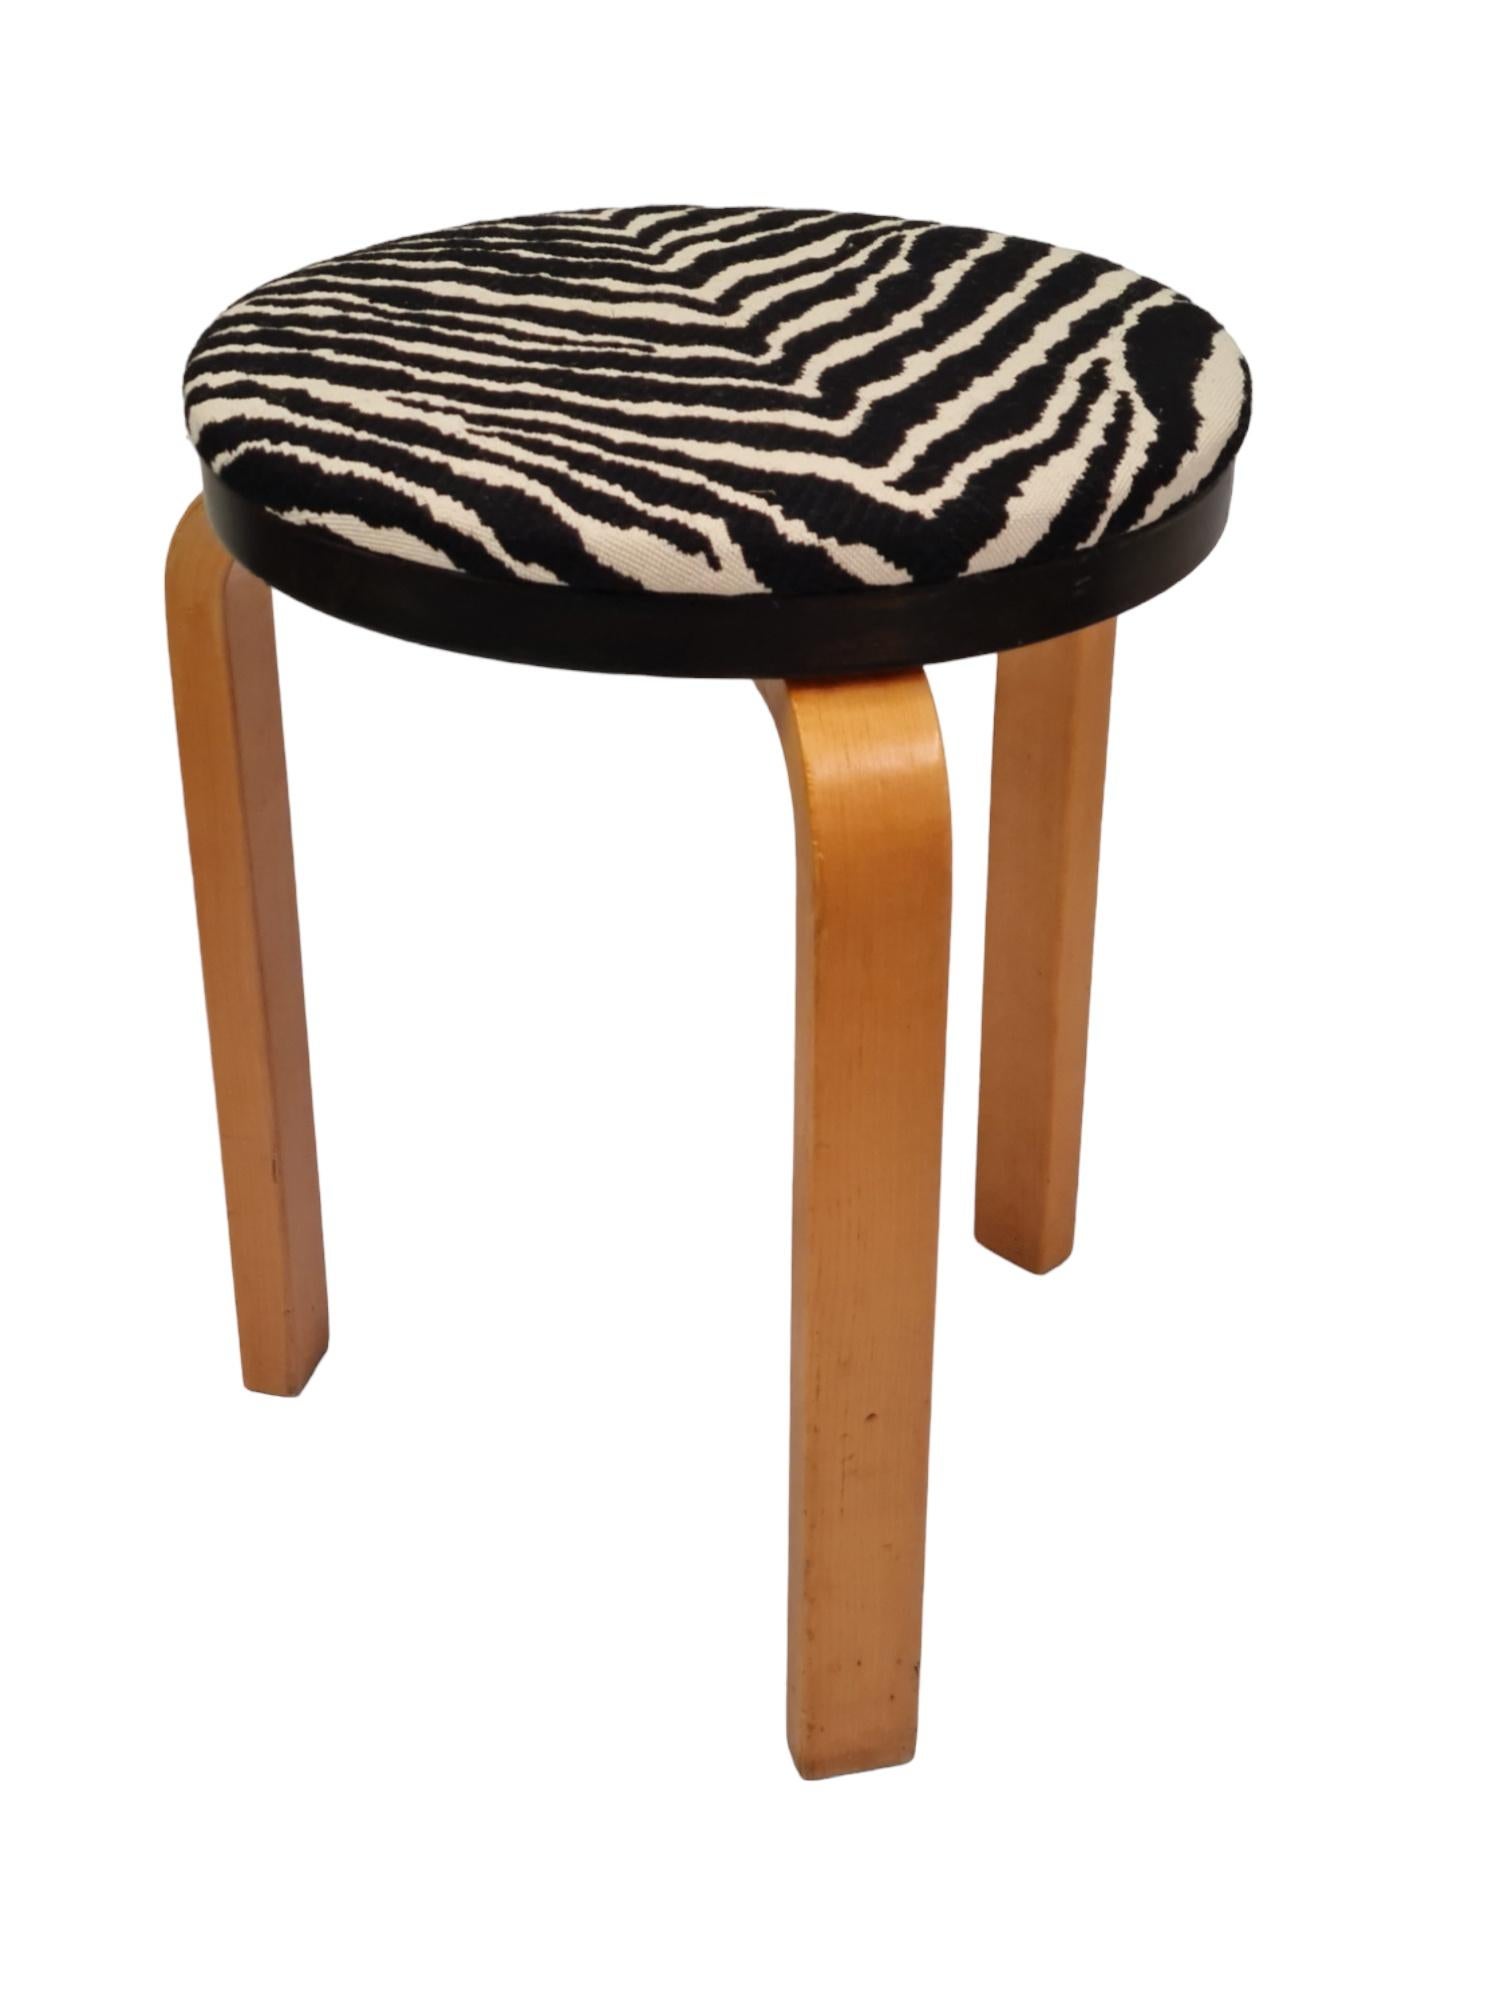 Yet another version of the Aalto famous 3-legged stool. This one is upholstered with original Artek zebra motif fabric. 
Aalto stools are quite desired in our opinion for their functionality and simplicity.  They are sturdy and firm to sit on,